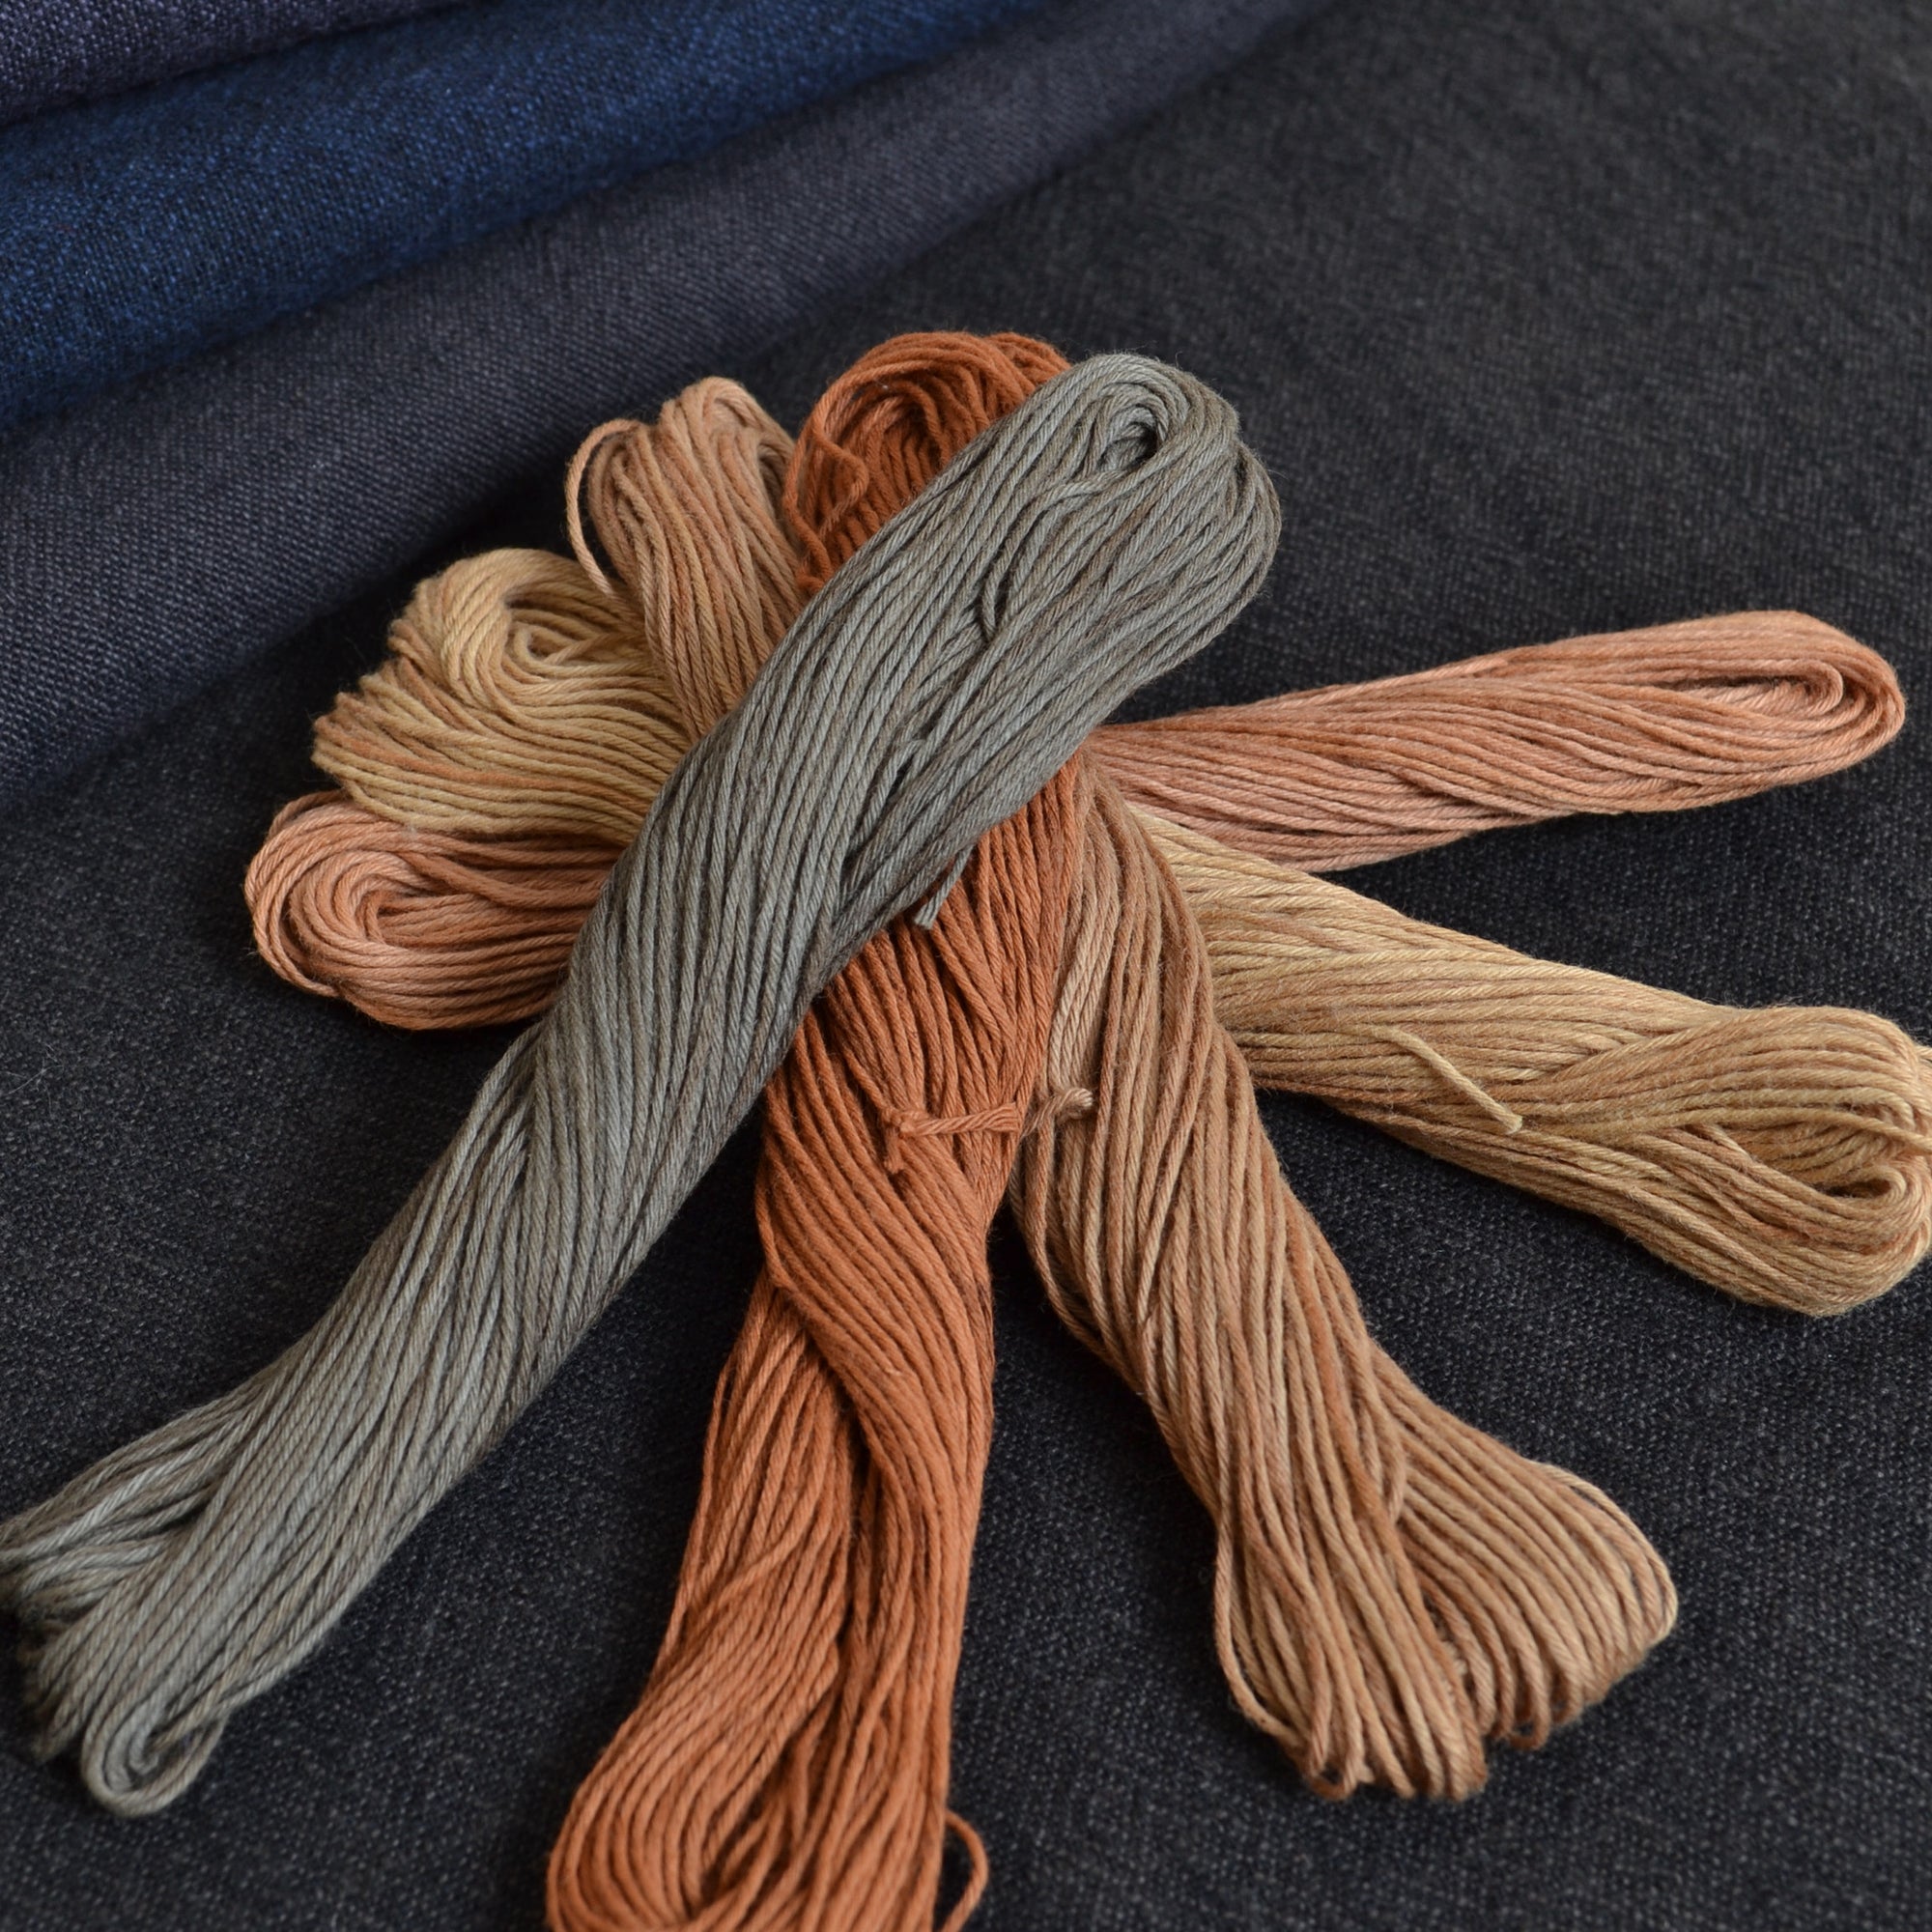 Fujix persimmon tannin plant dyed cotton threads